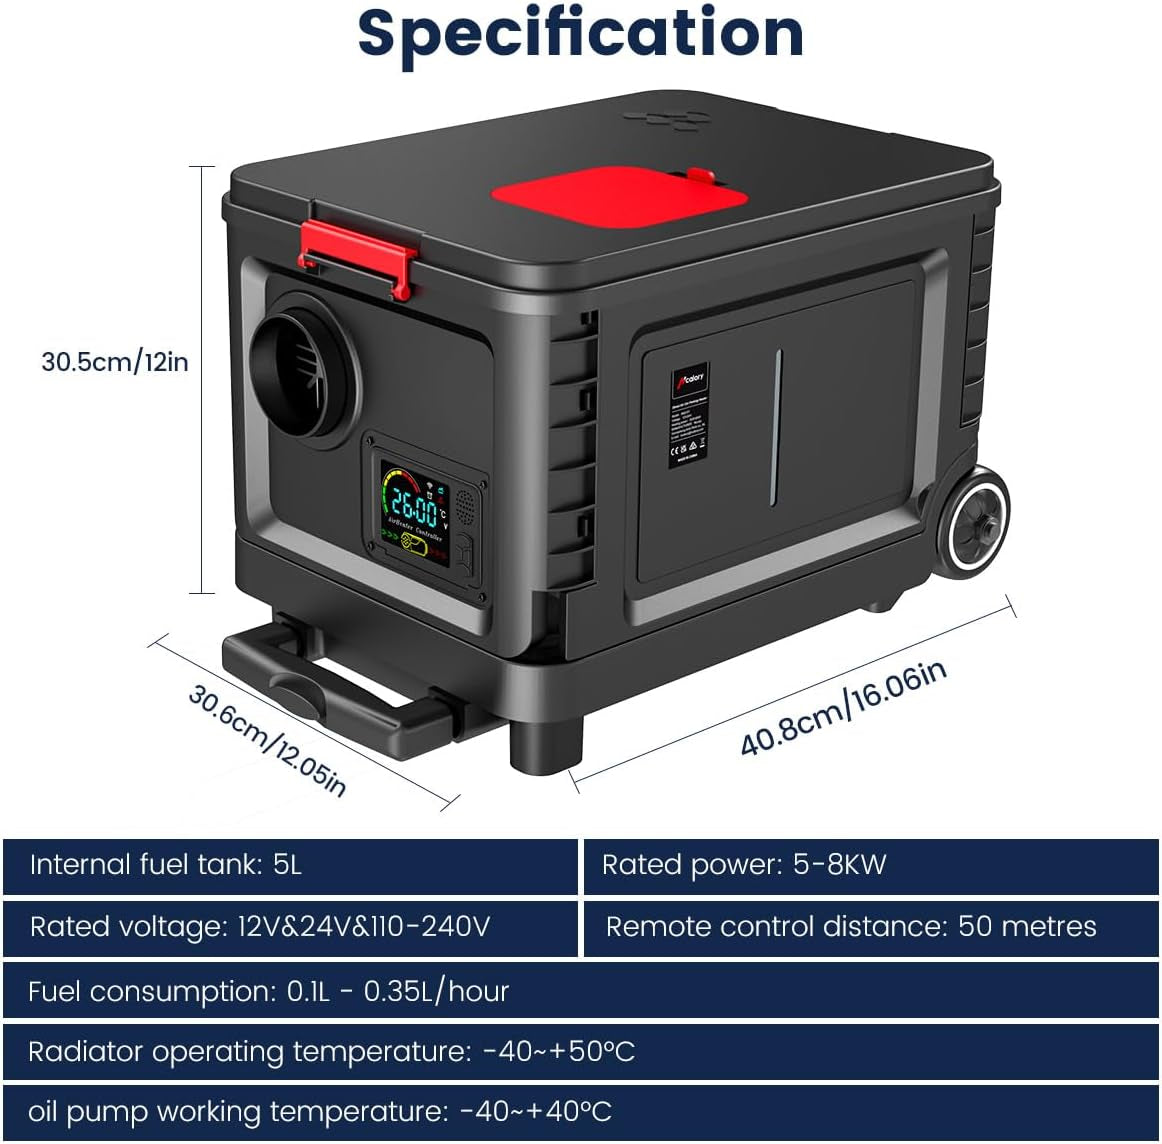 Diesel Heater 8KW, Portable Diesel Air Heater All-In-One with Bluetooth Control and LCD Screen, Parking Diesel Heaters 110V AC & 12V 24V DC, 5L Fuel Tank for Car, Truck, Boat, Rv,Campers